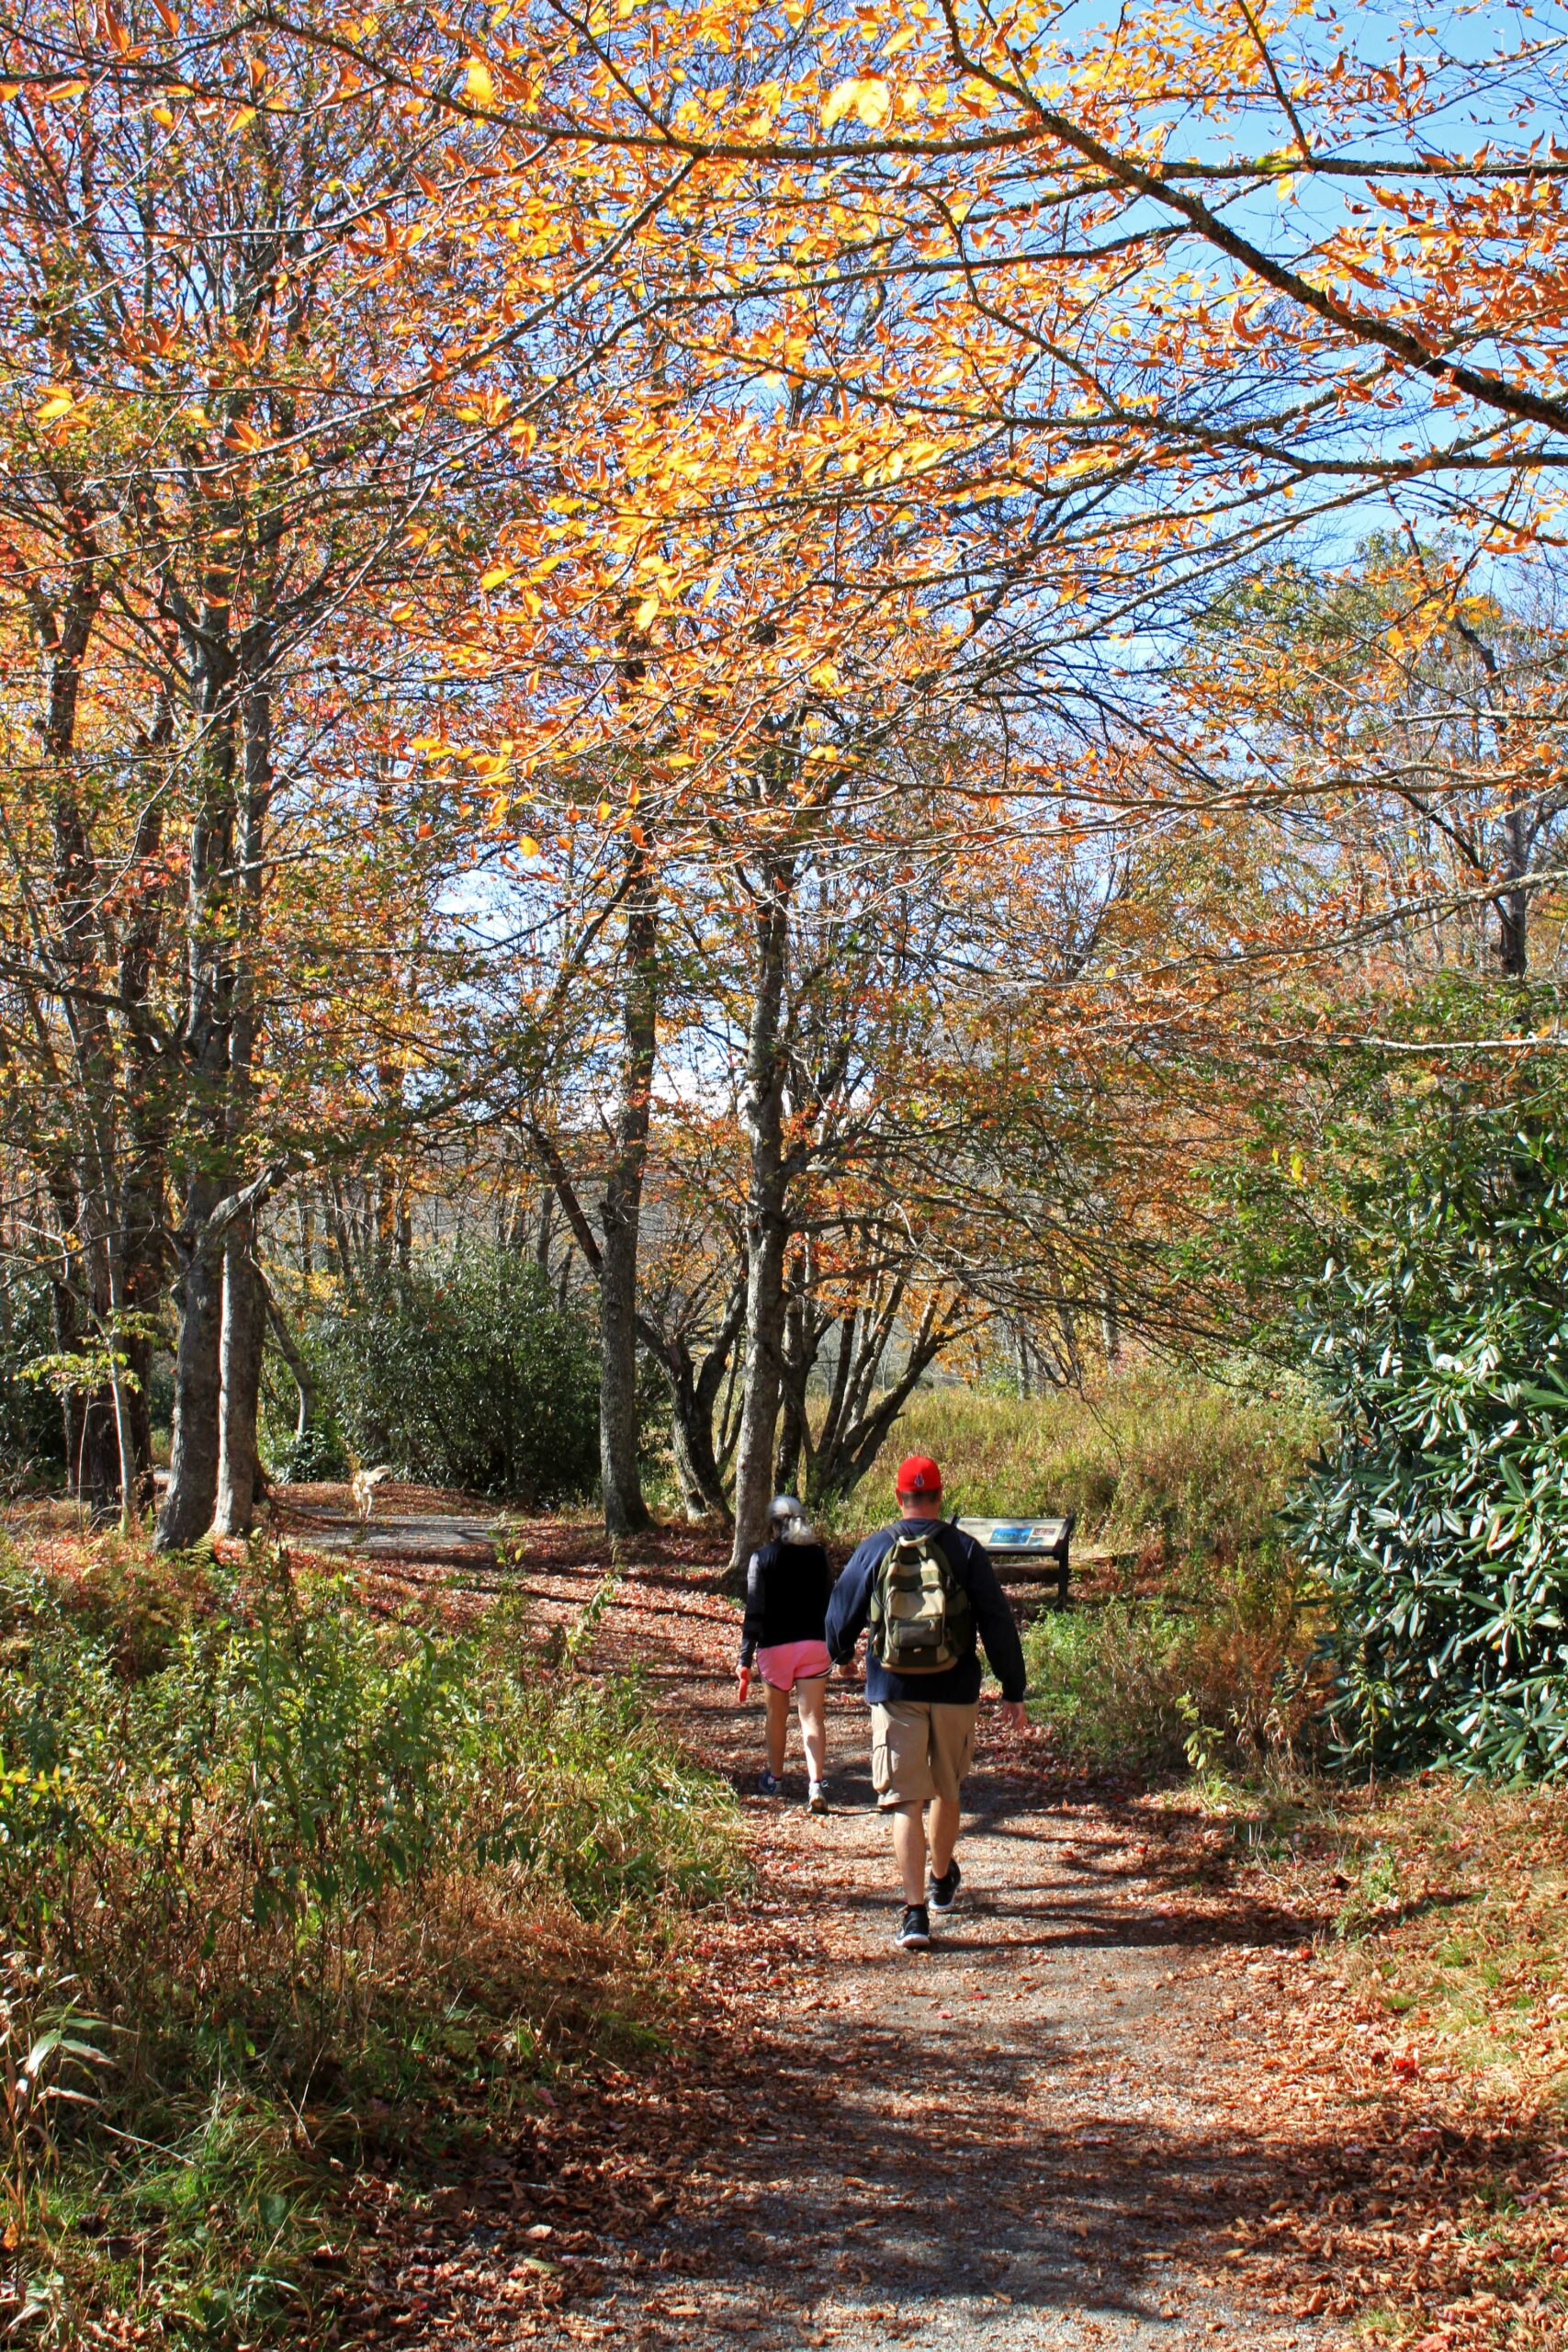 Two people hiking on a trail surrounded by fall leaves